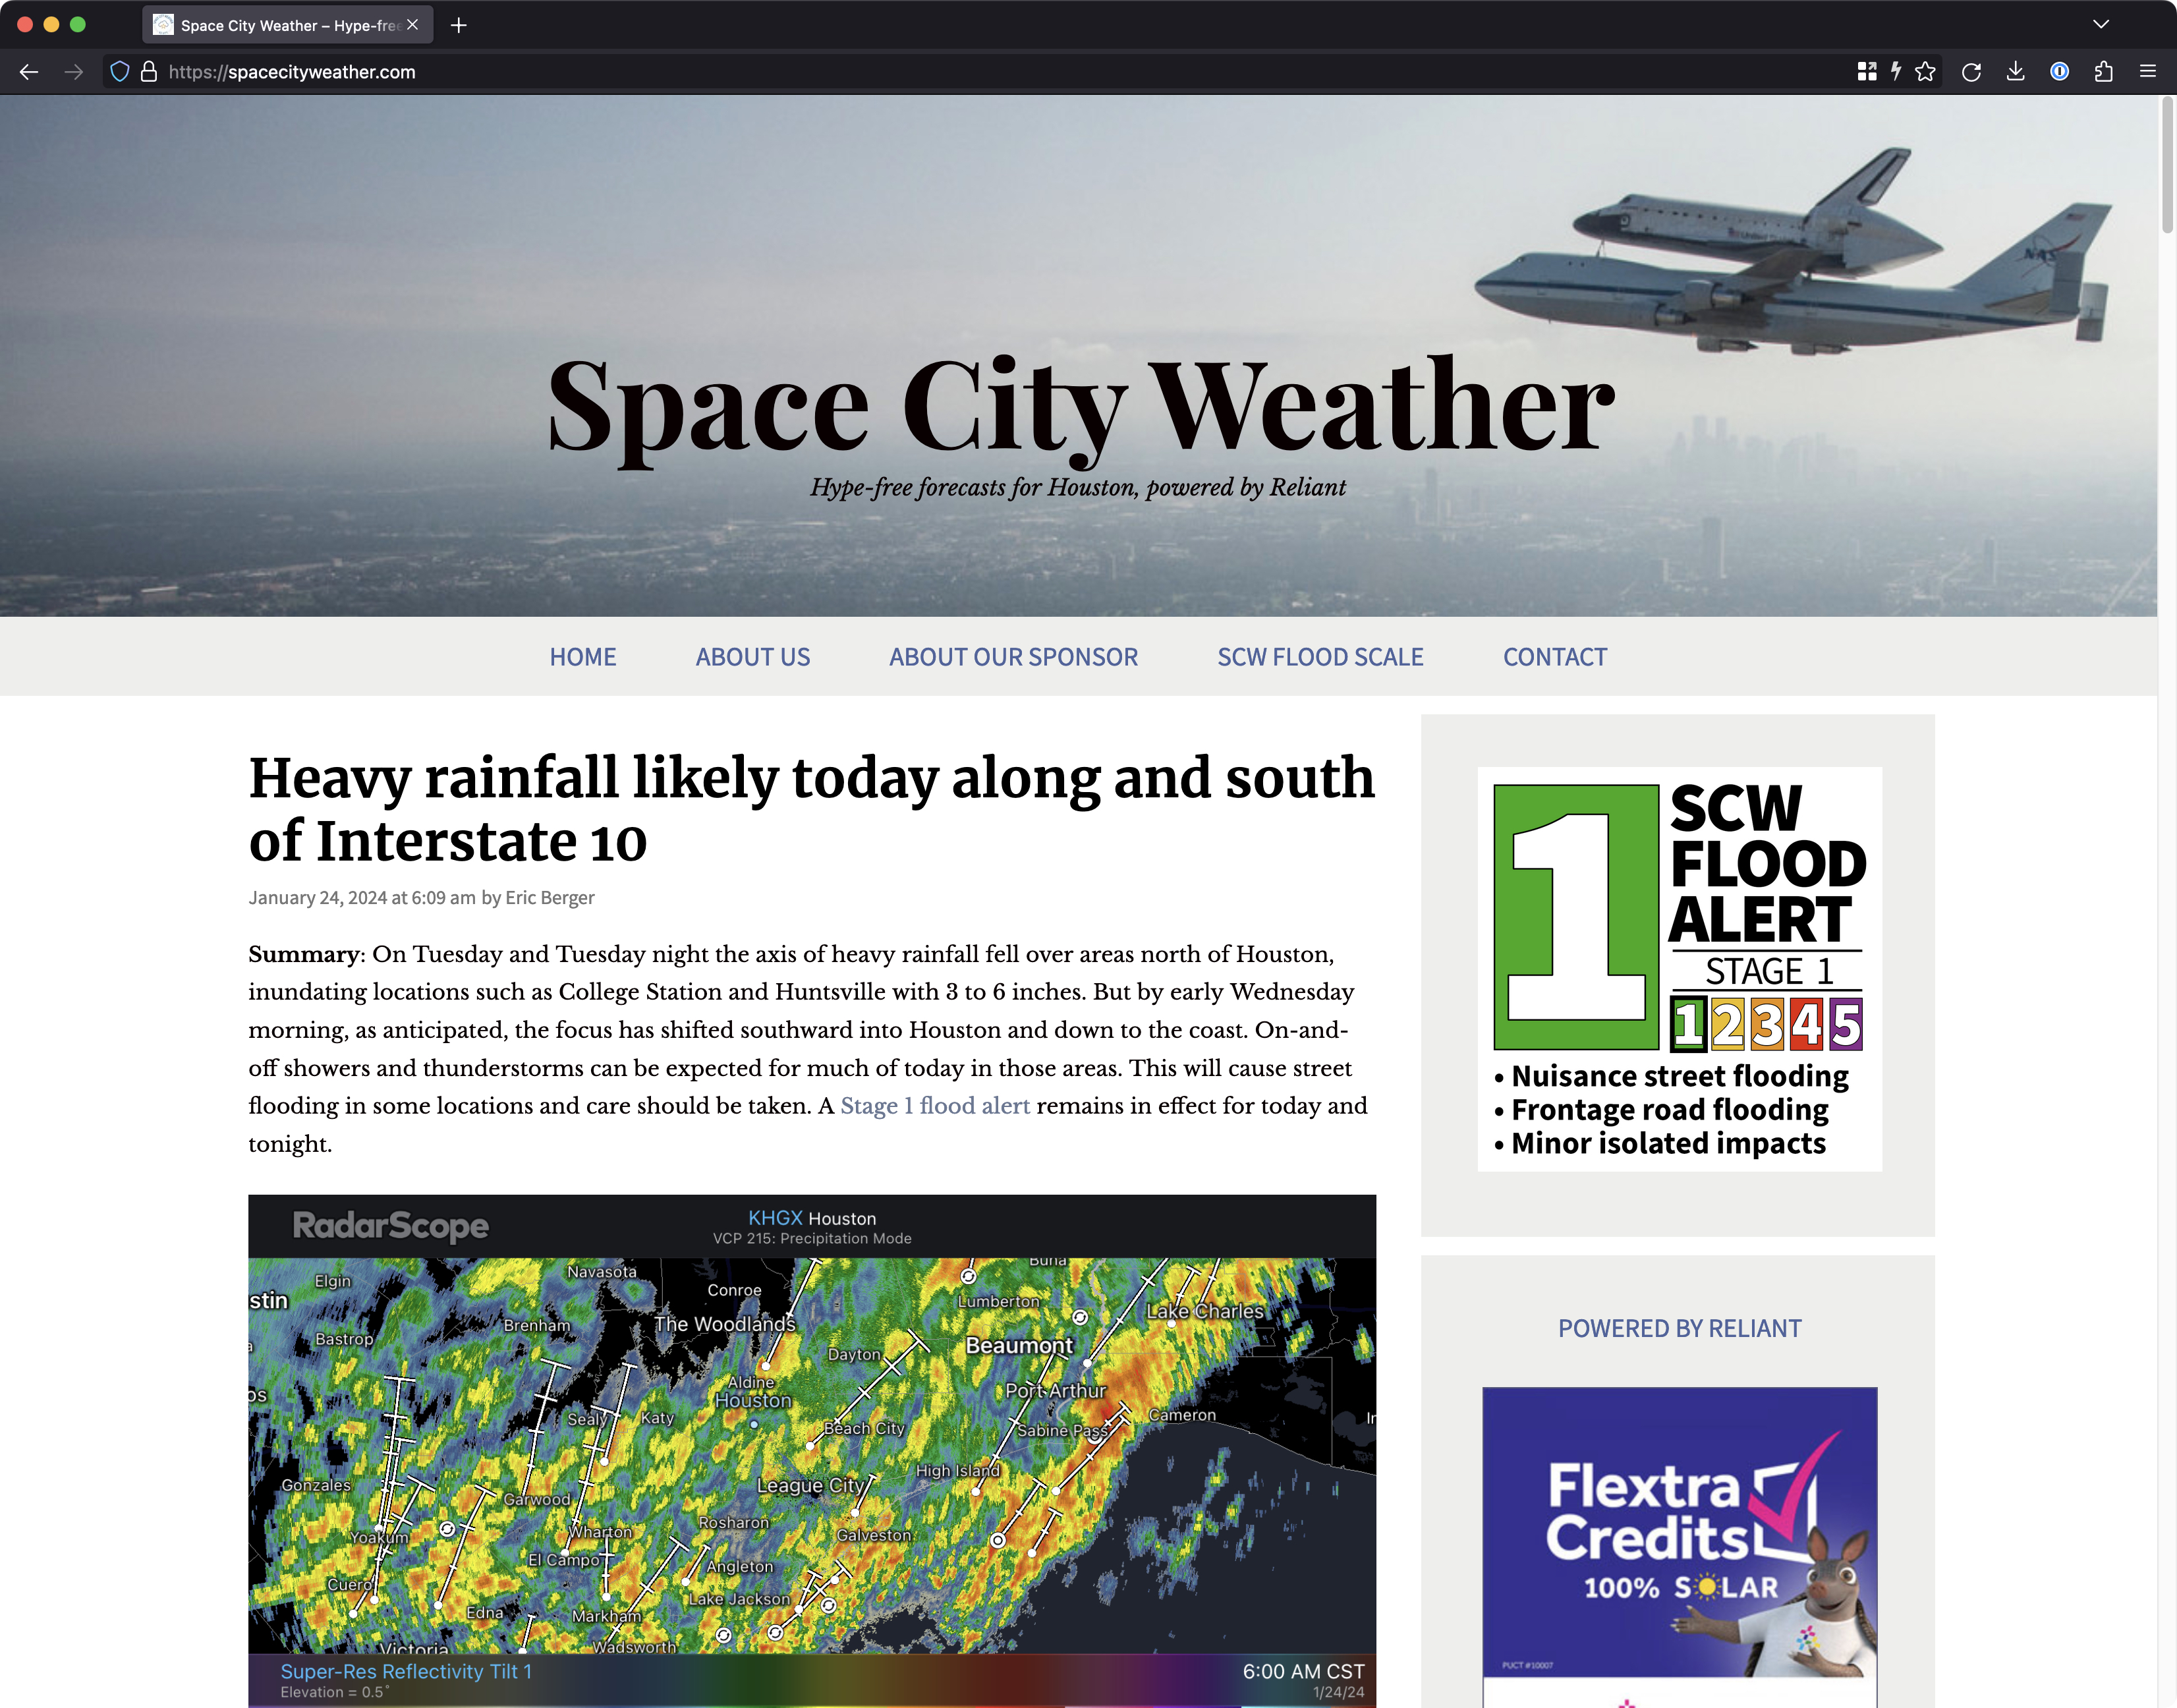 Hey, it's <a href="https://spacecityweather.com">Space City Weather</a>!